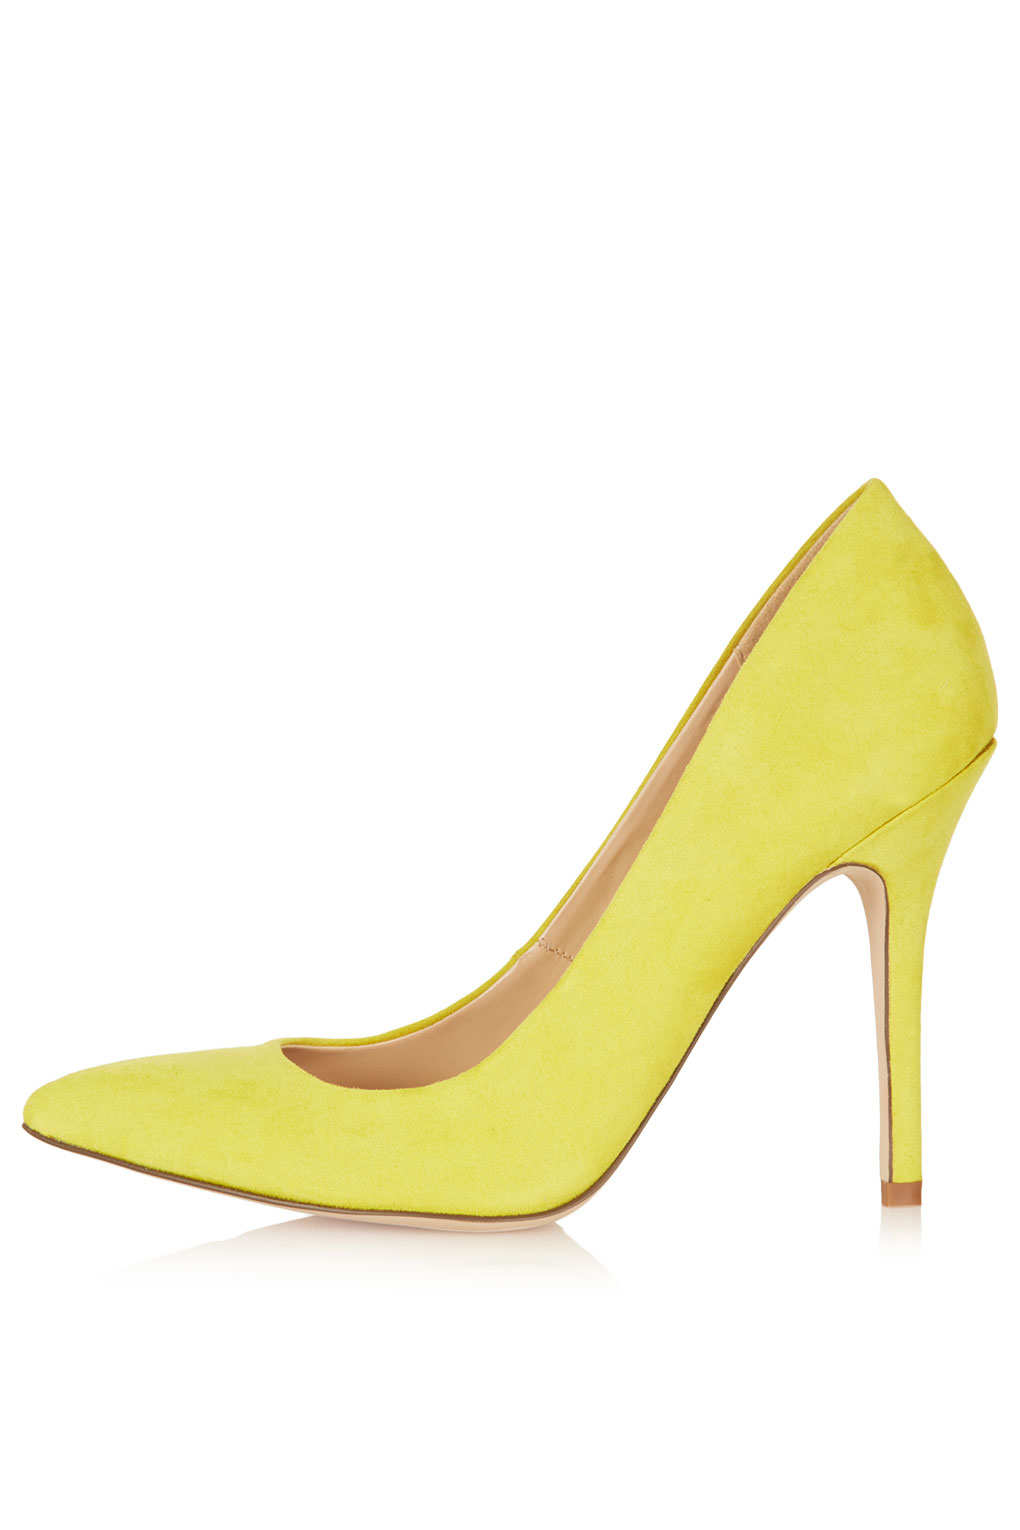 topshop yellow shoes